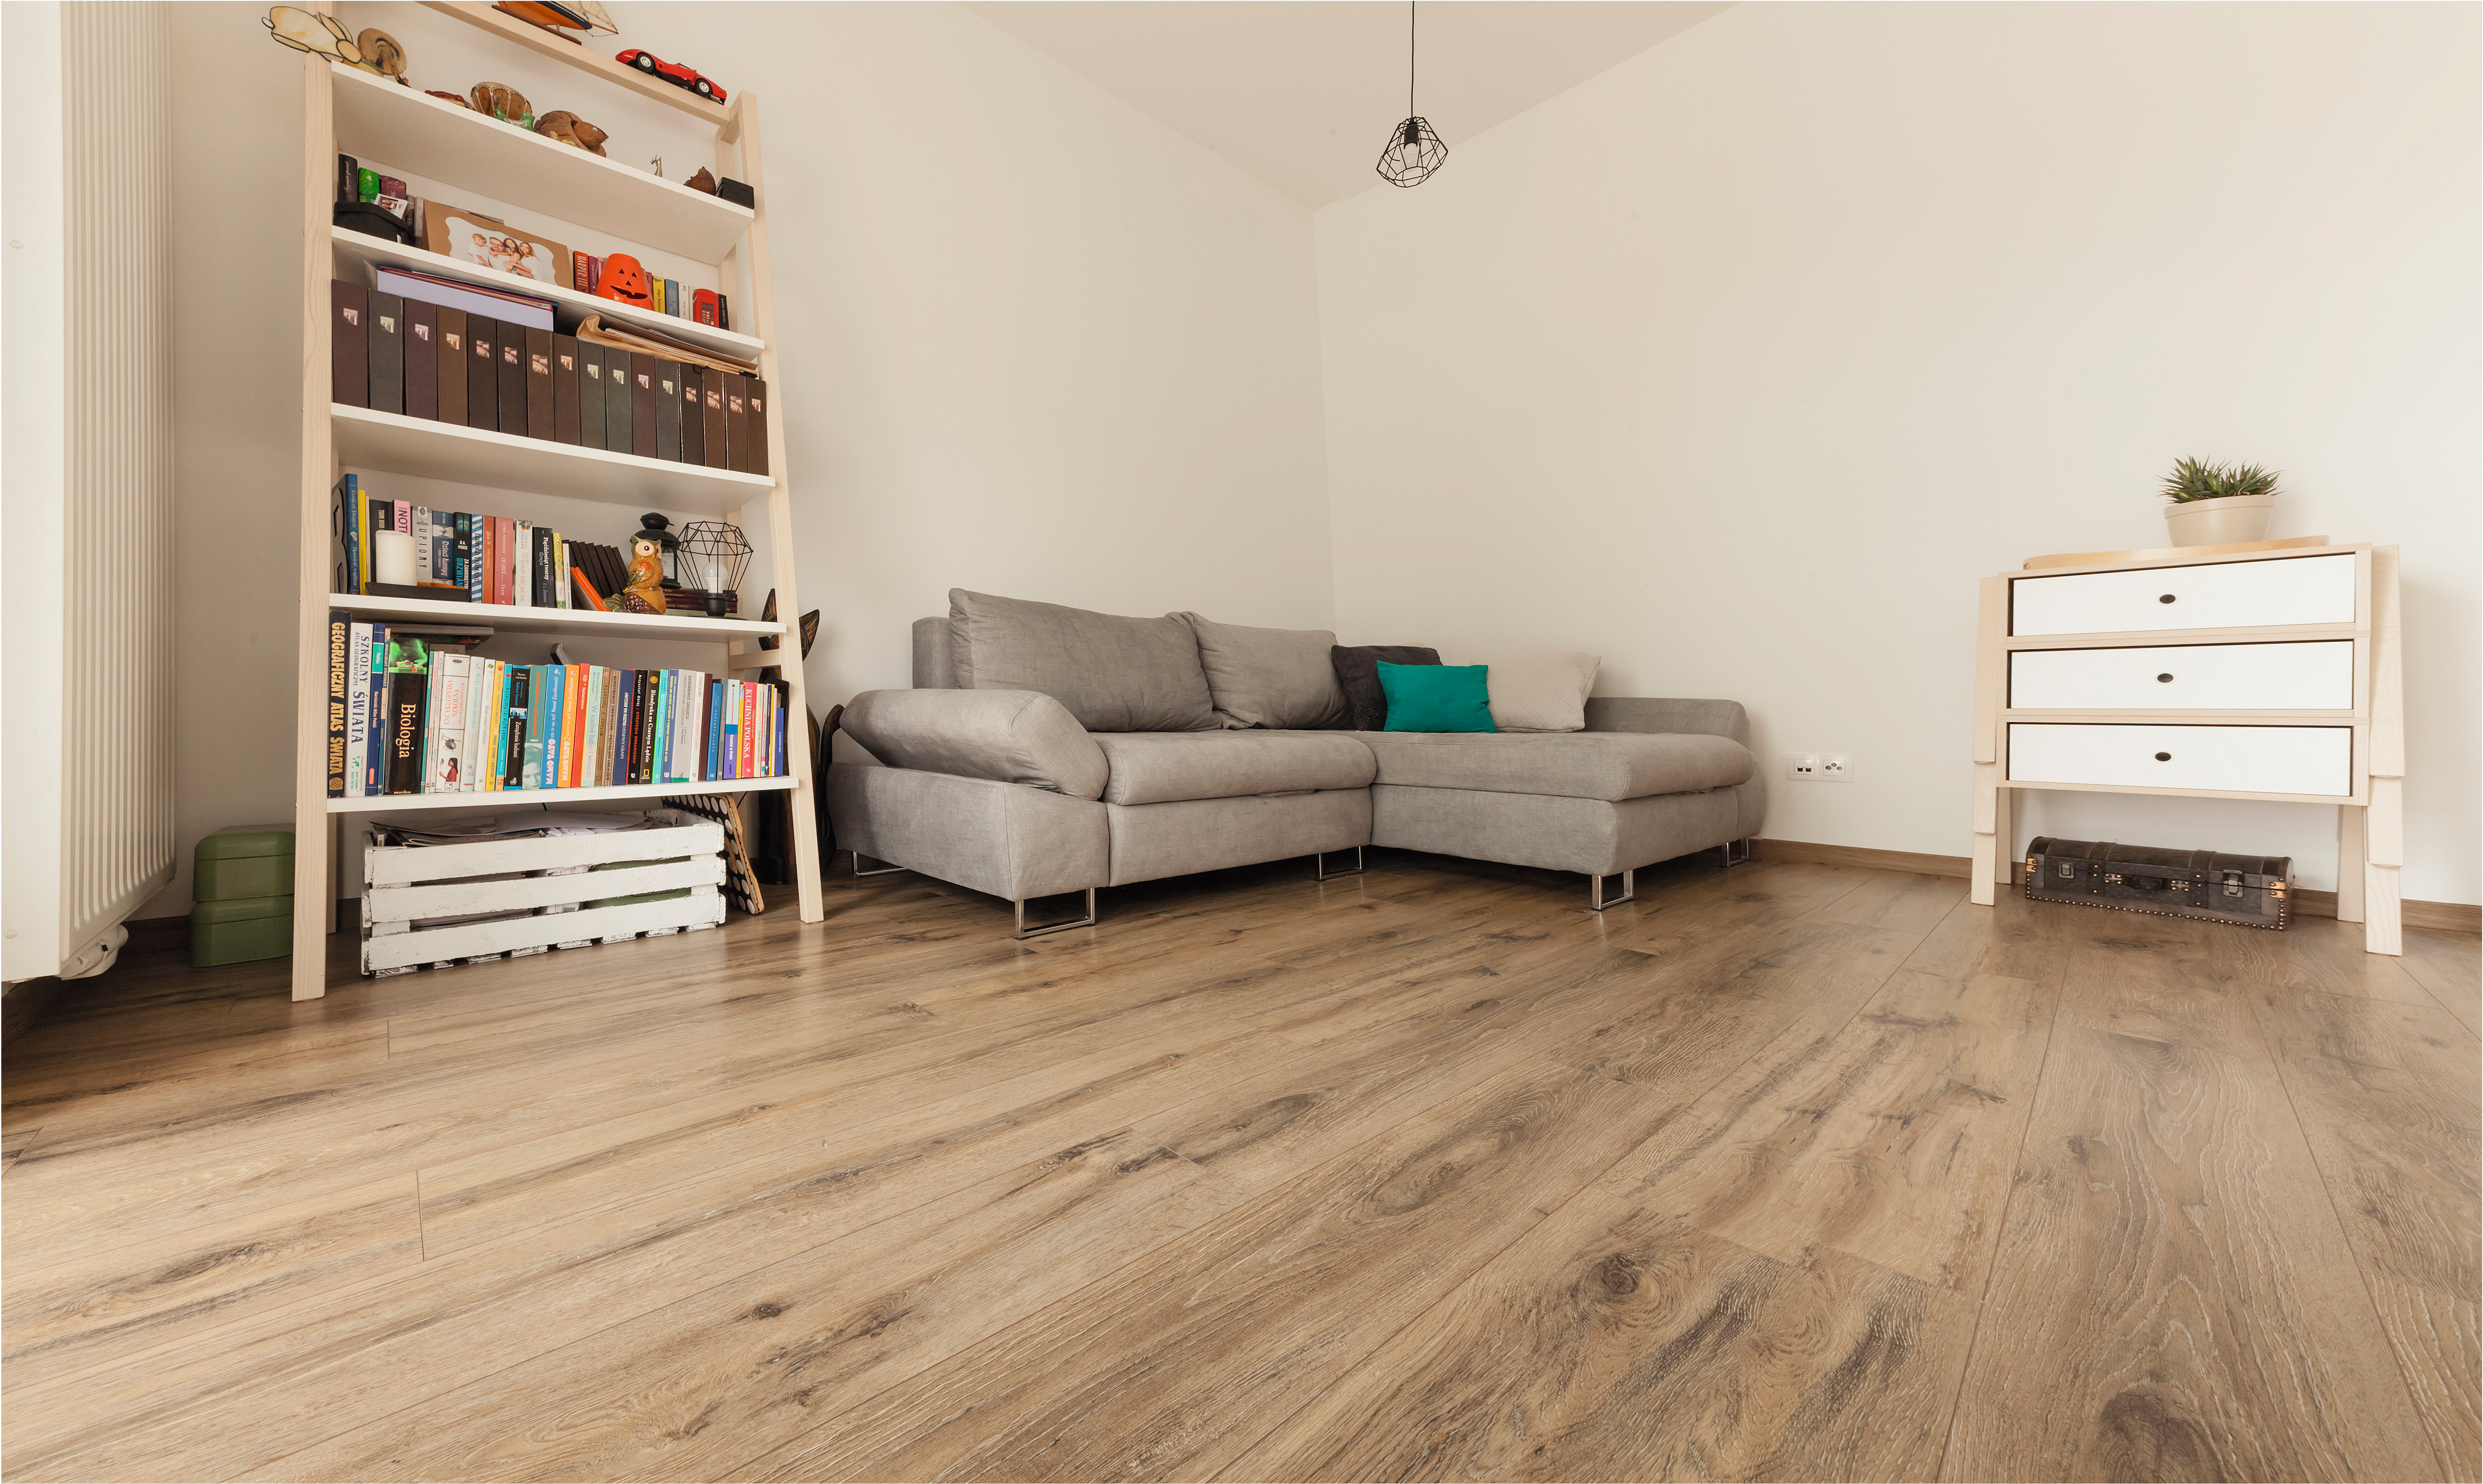 The Parquet Oak dark works very well with the light nuances of the interior.